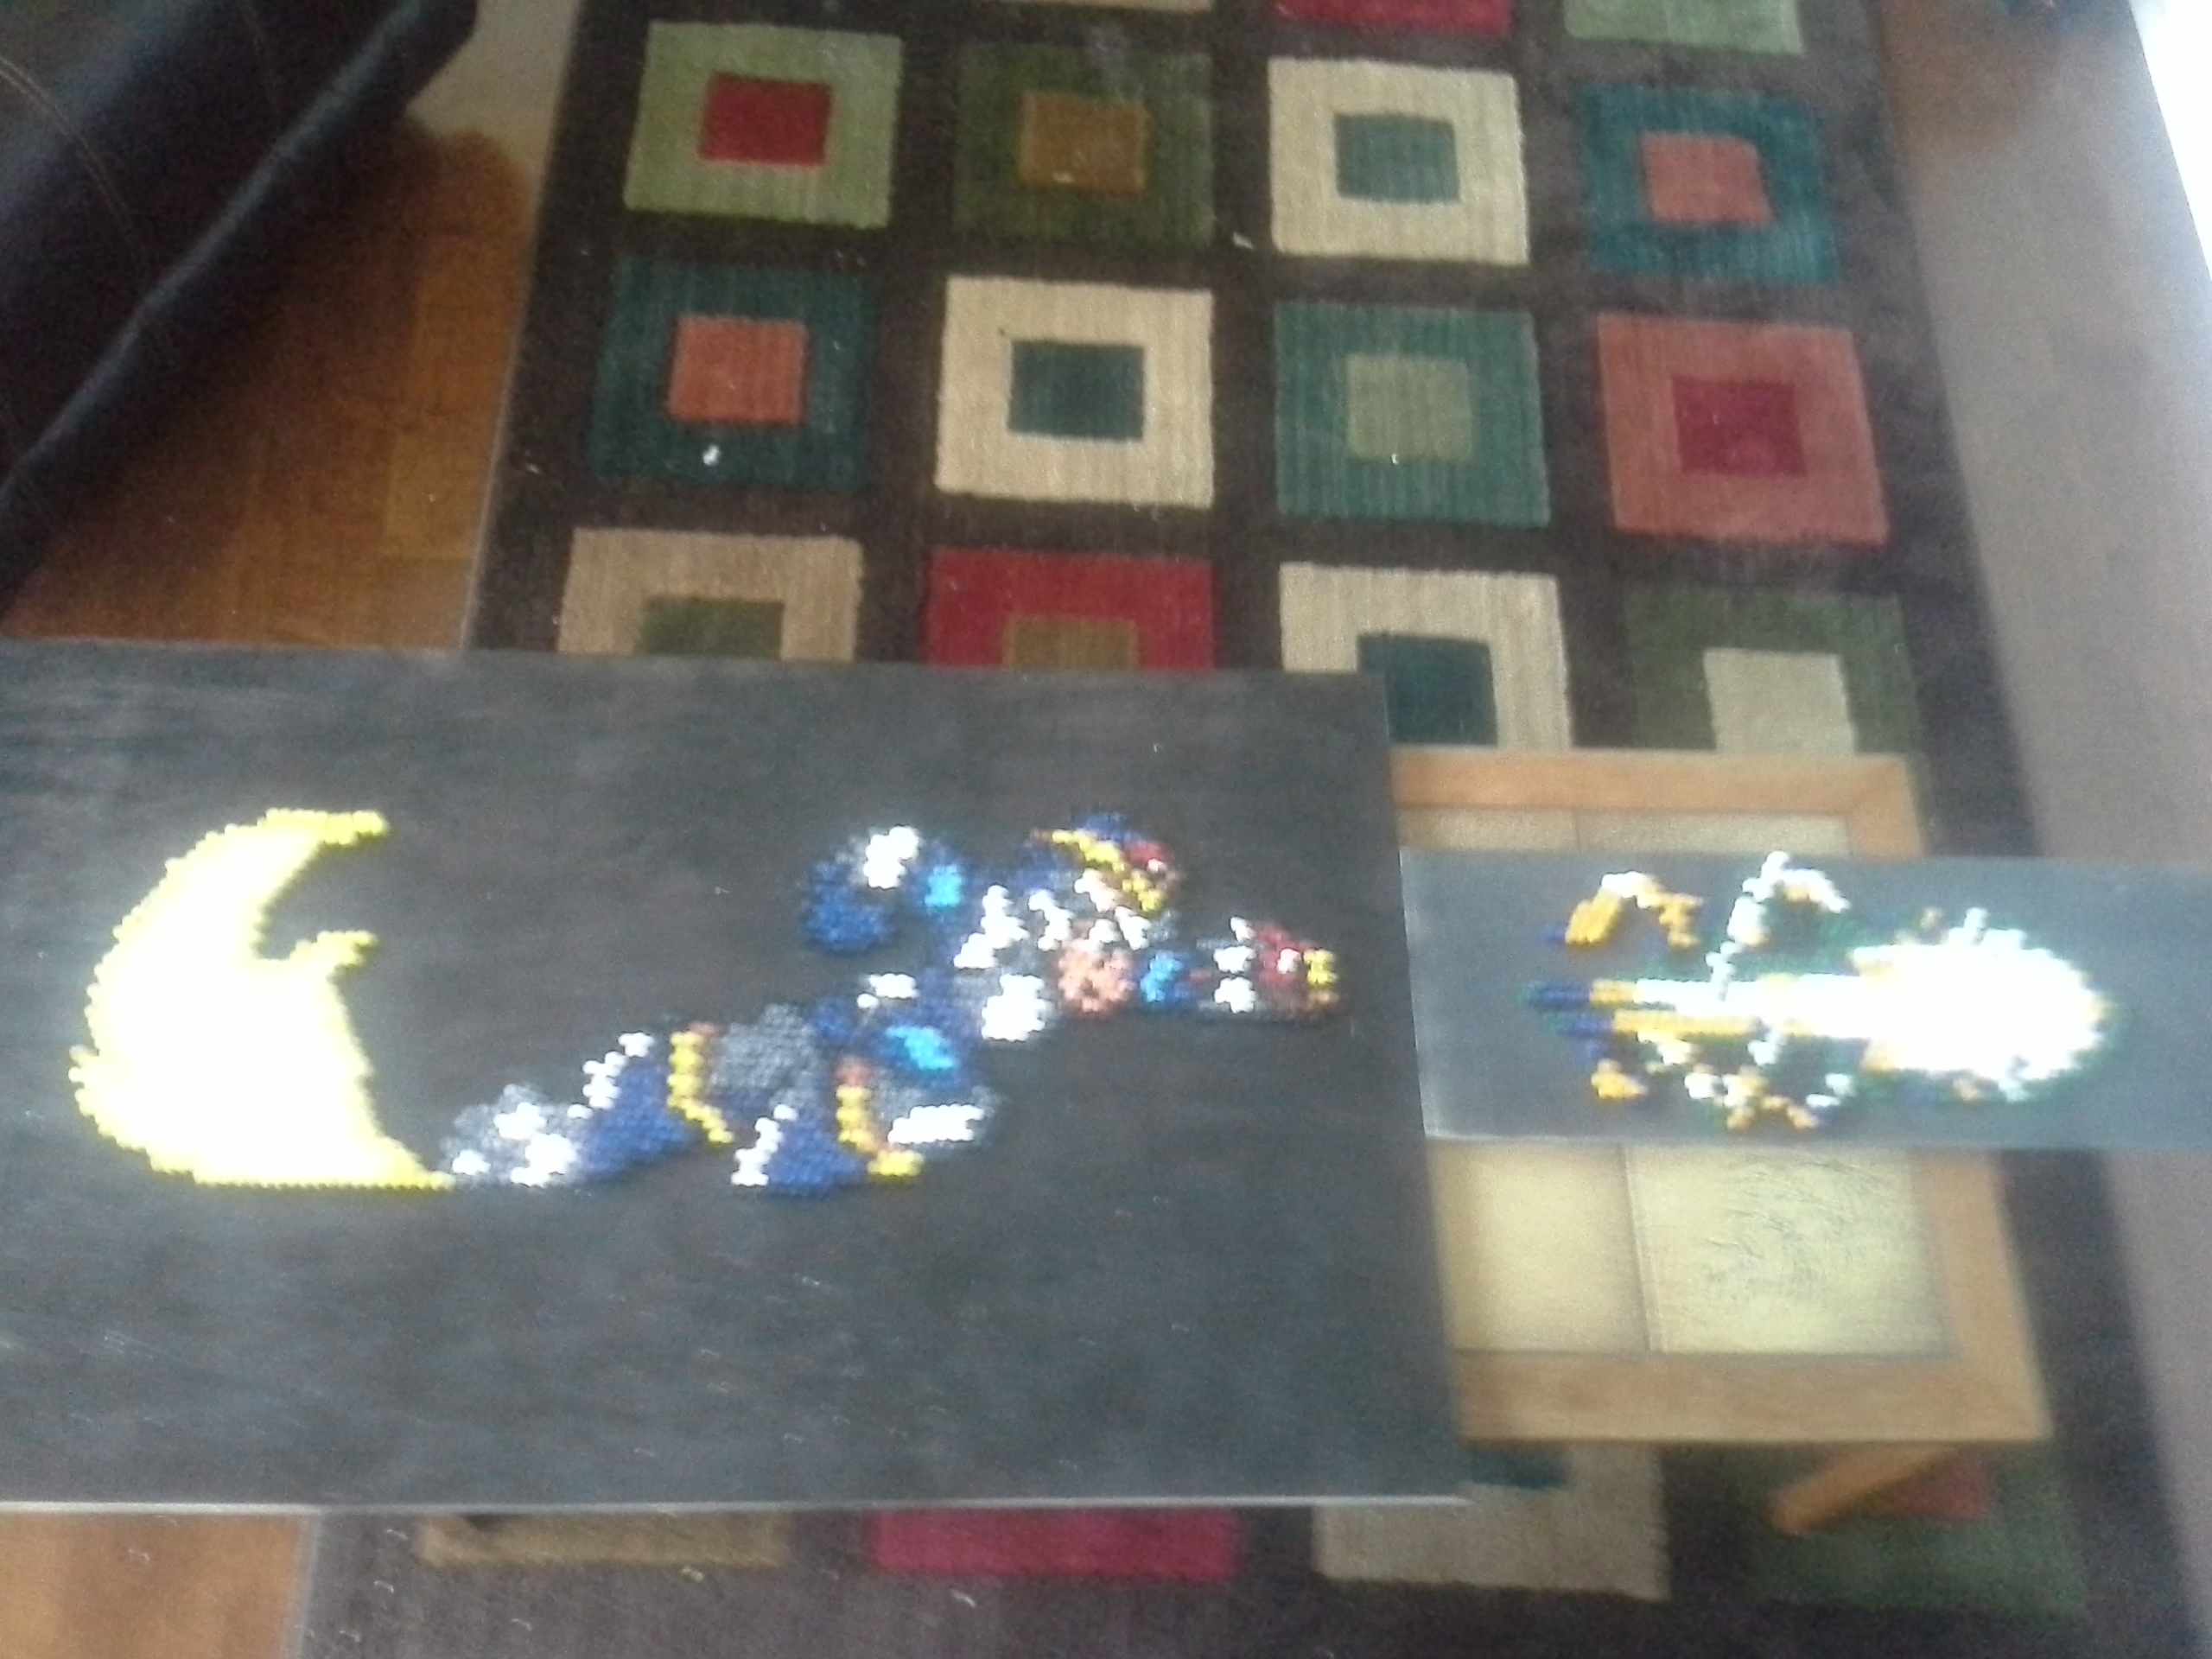 MegaMan X mosaic completed